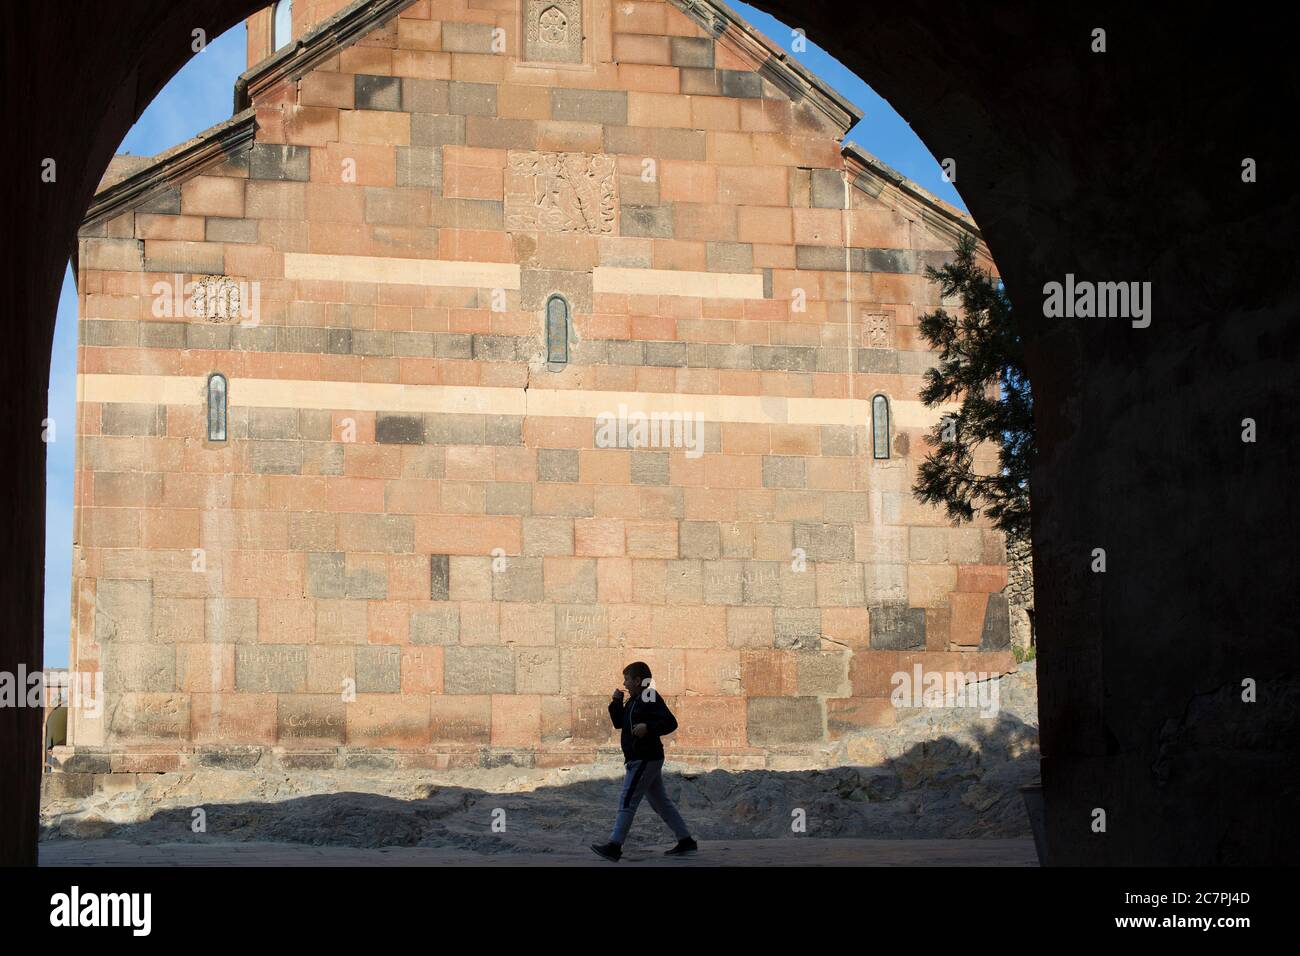 Tourists & visitors are given guided tours around the interior of St. Astvatsatsin at Khor Virap while priests go about their daily business. Armenia Stock Photo